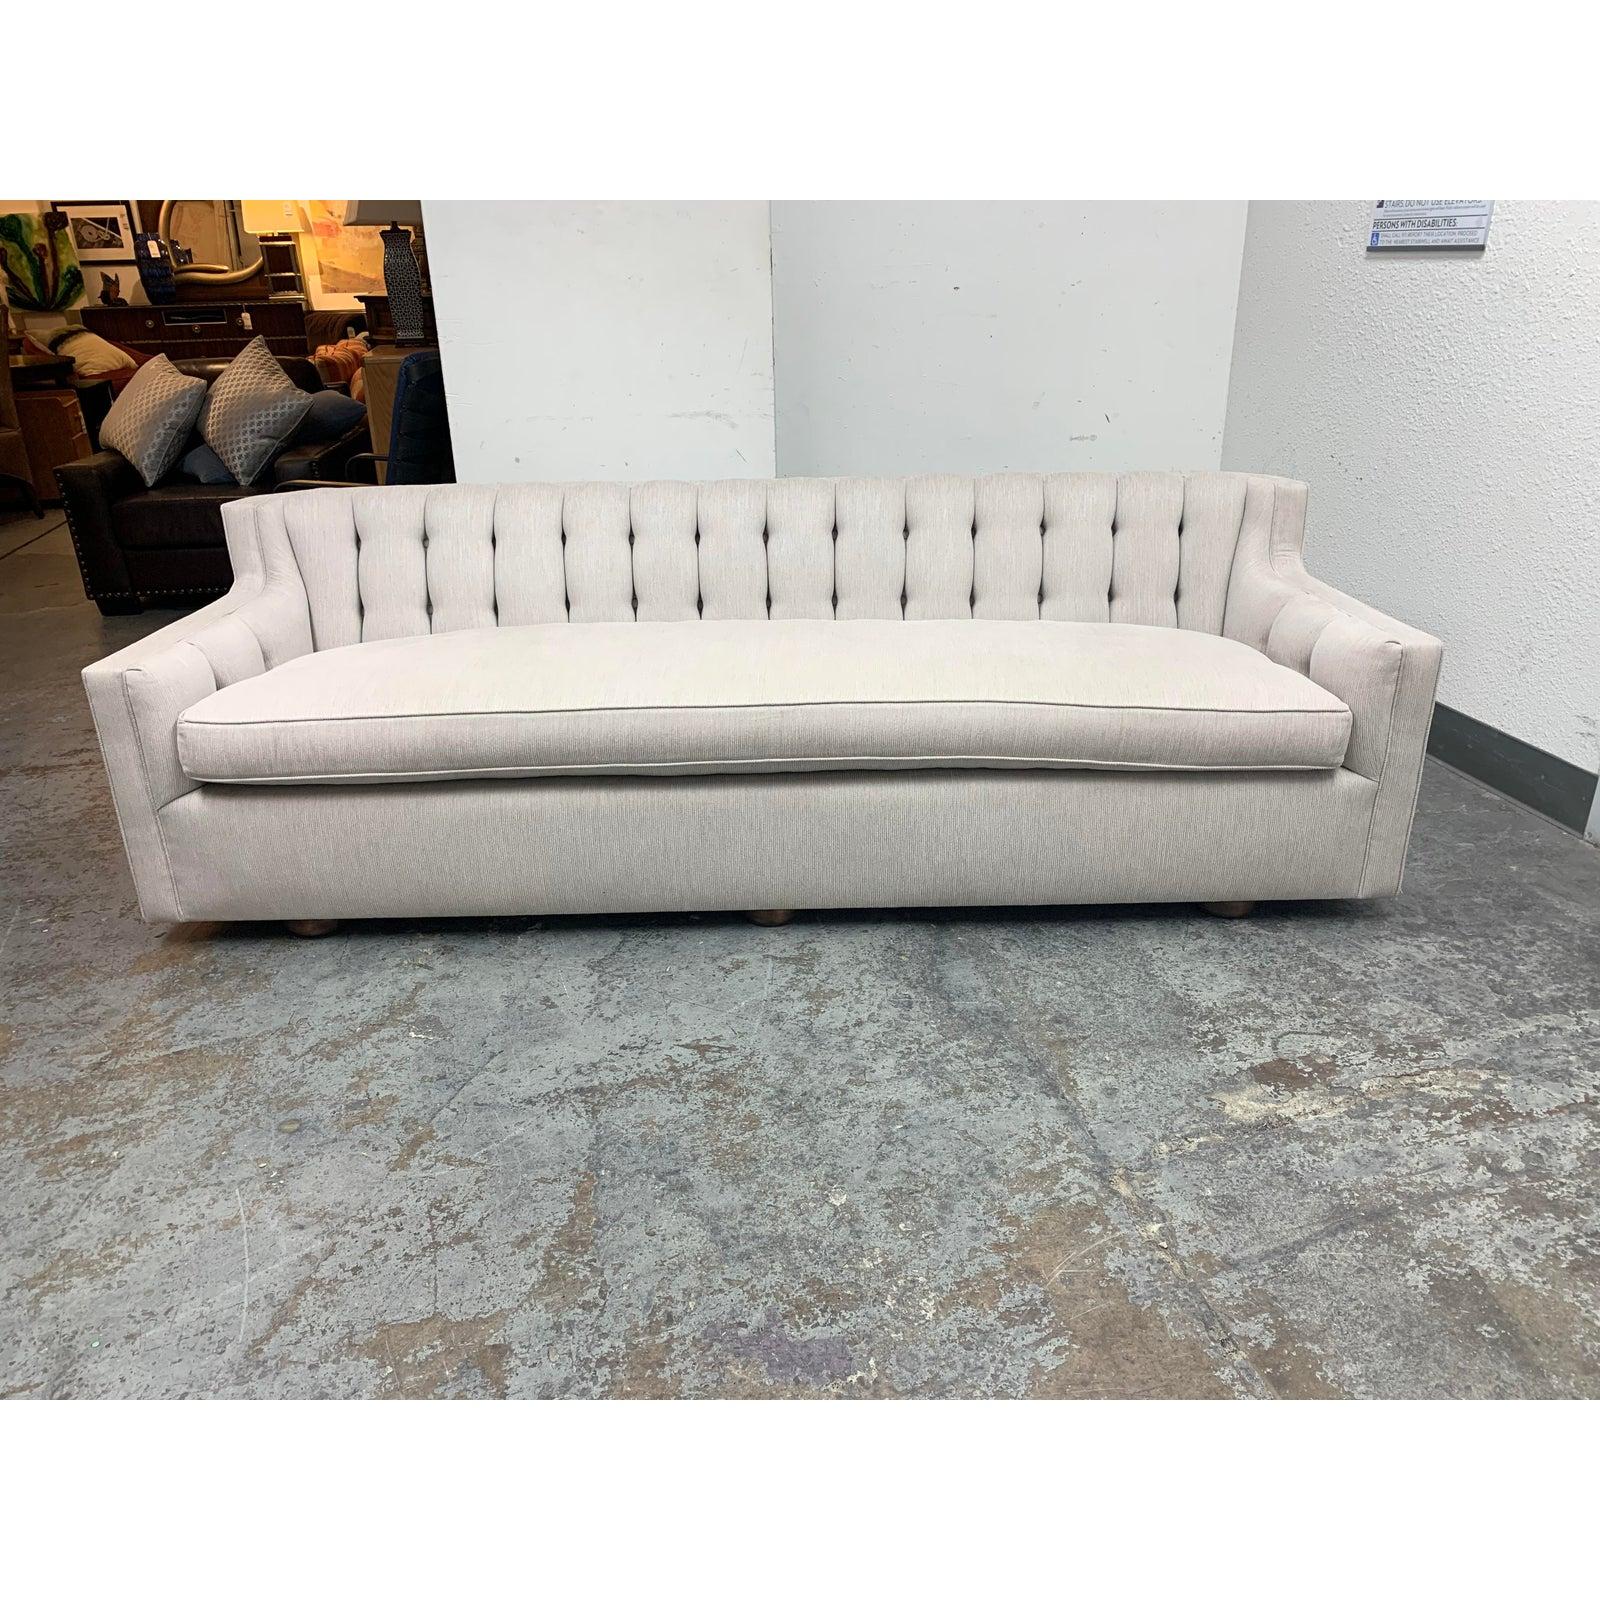 Other Custom Tufted Shell Slope Arm Sofa For Sale